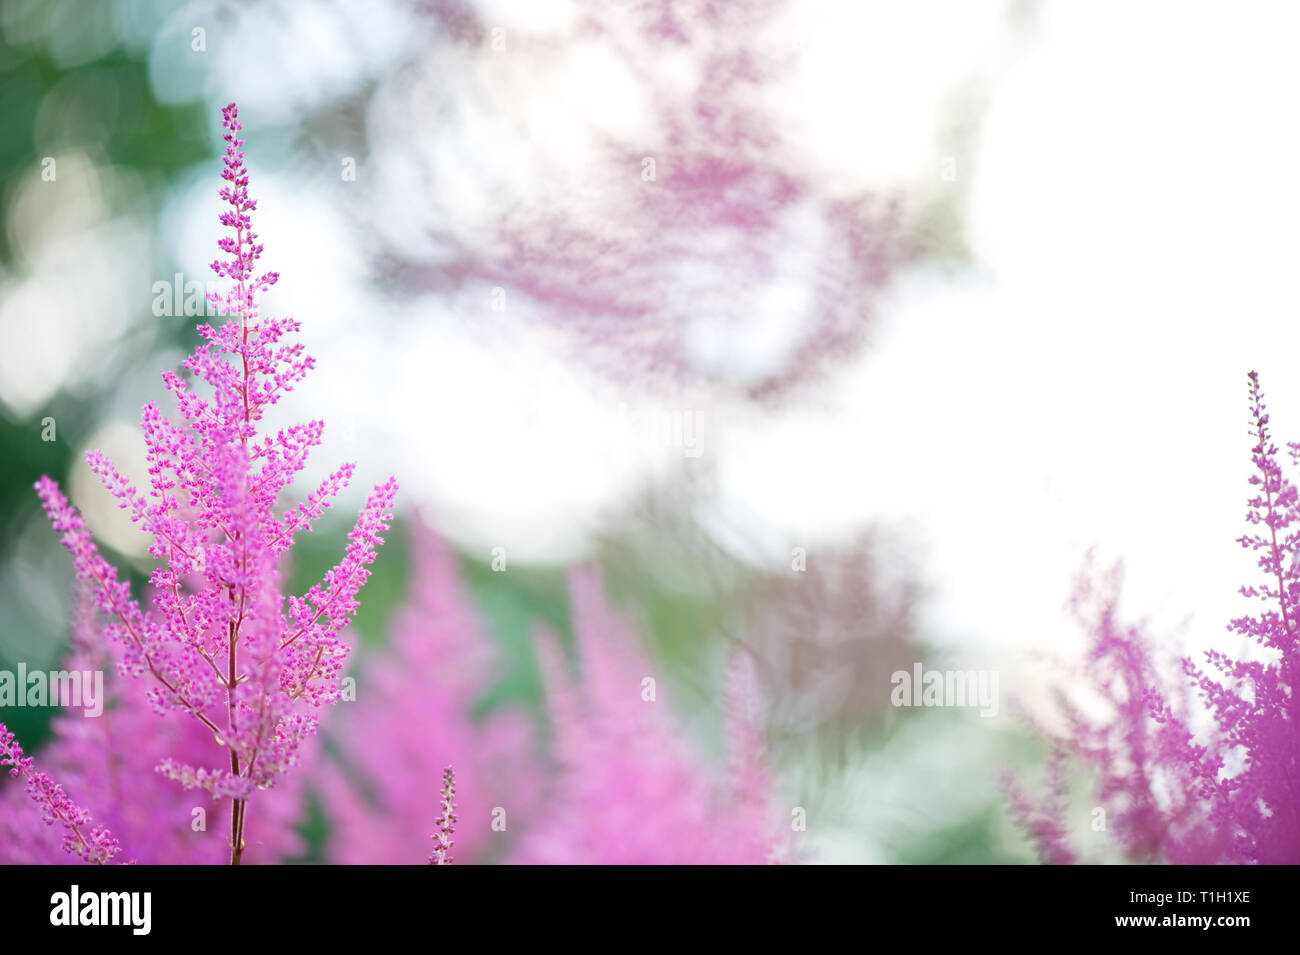 Astilbe flowers blooming in summer. Selective focus and shallow depth of field. Stock Photo